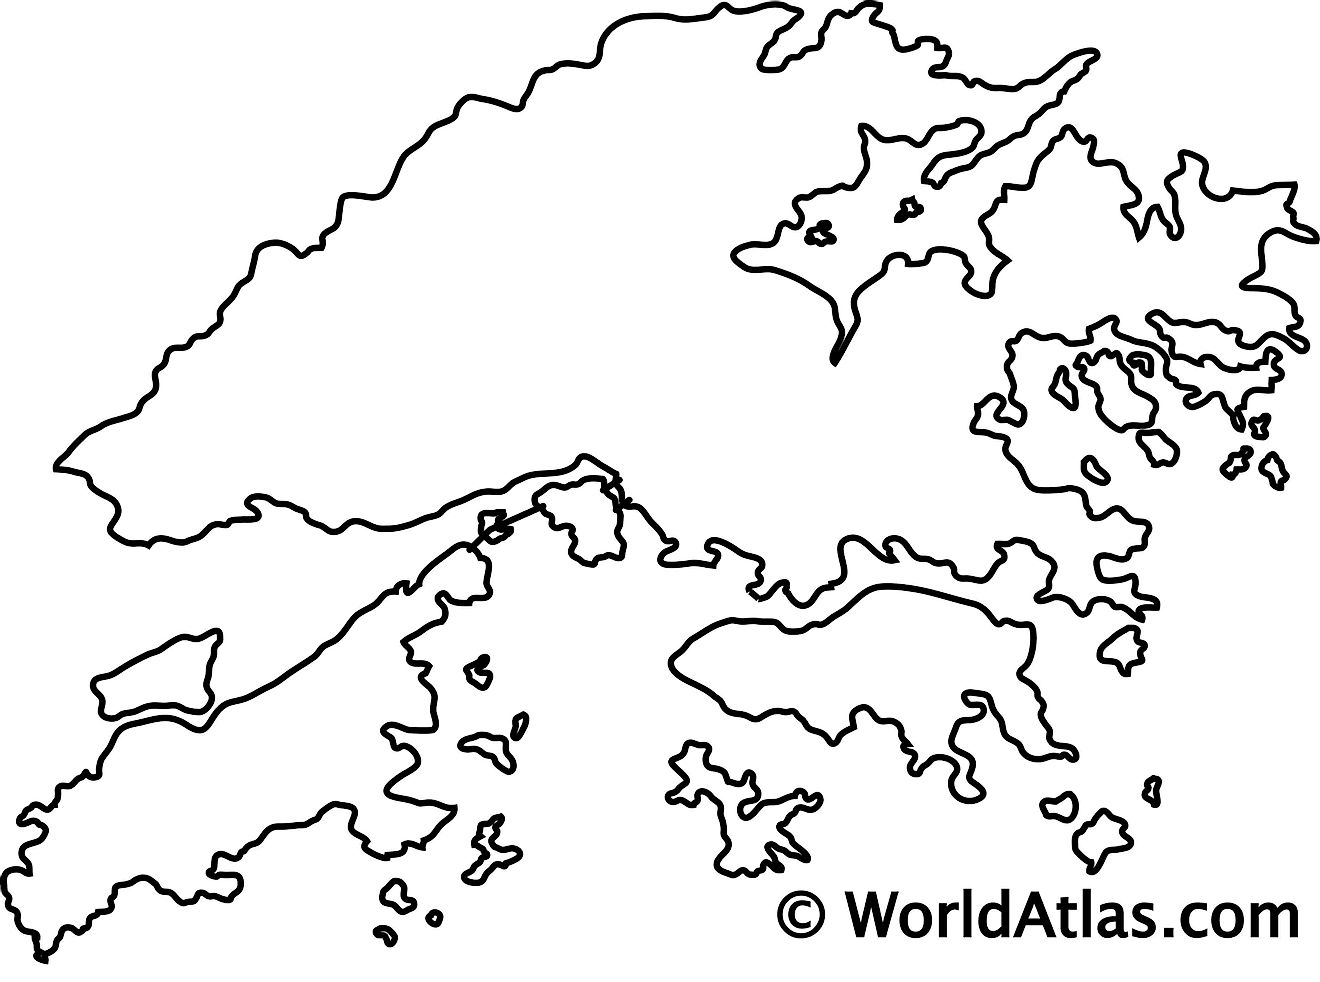 Blank Outline Map of Hong Kong